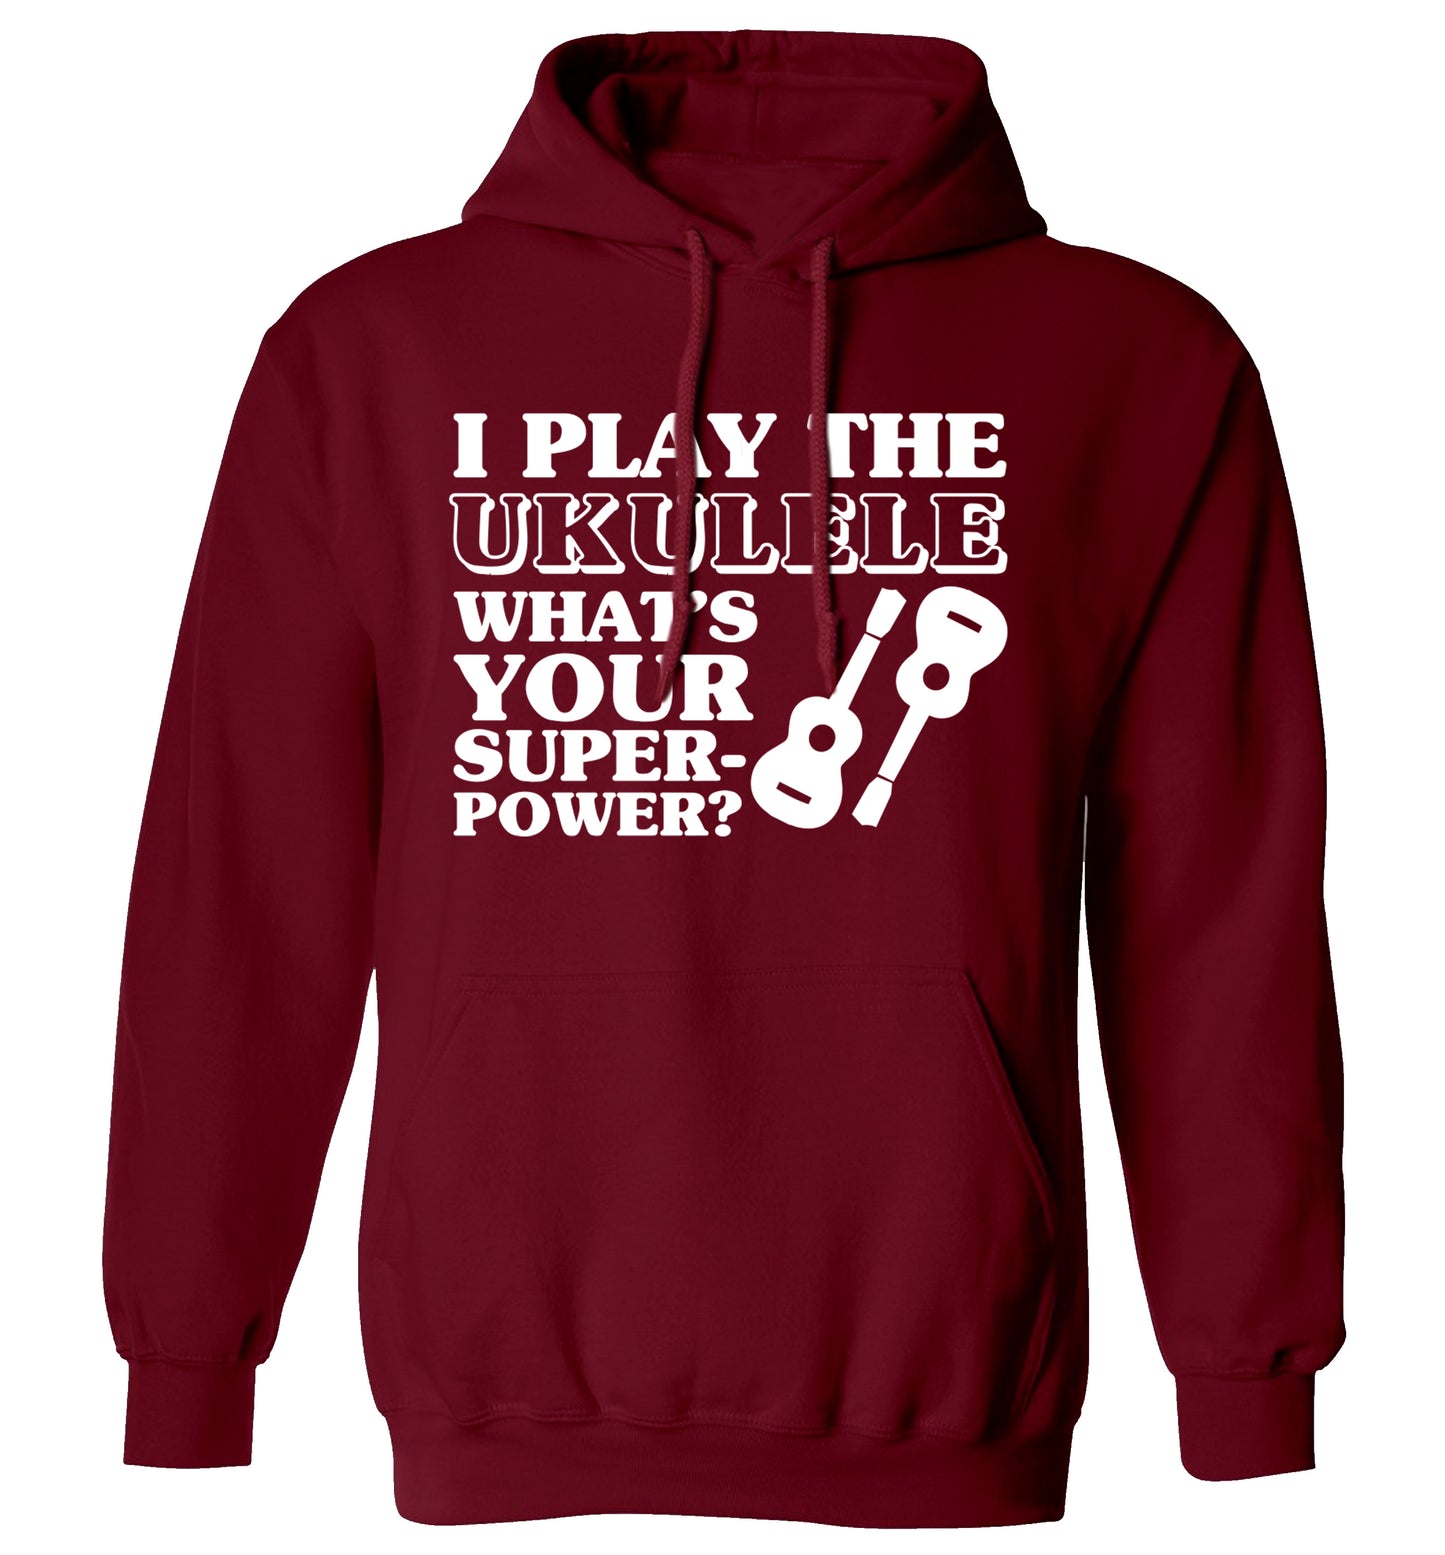 I play the ukulele what's your superpower? adults unisex maroon hoodie 2XL